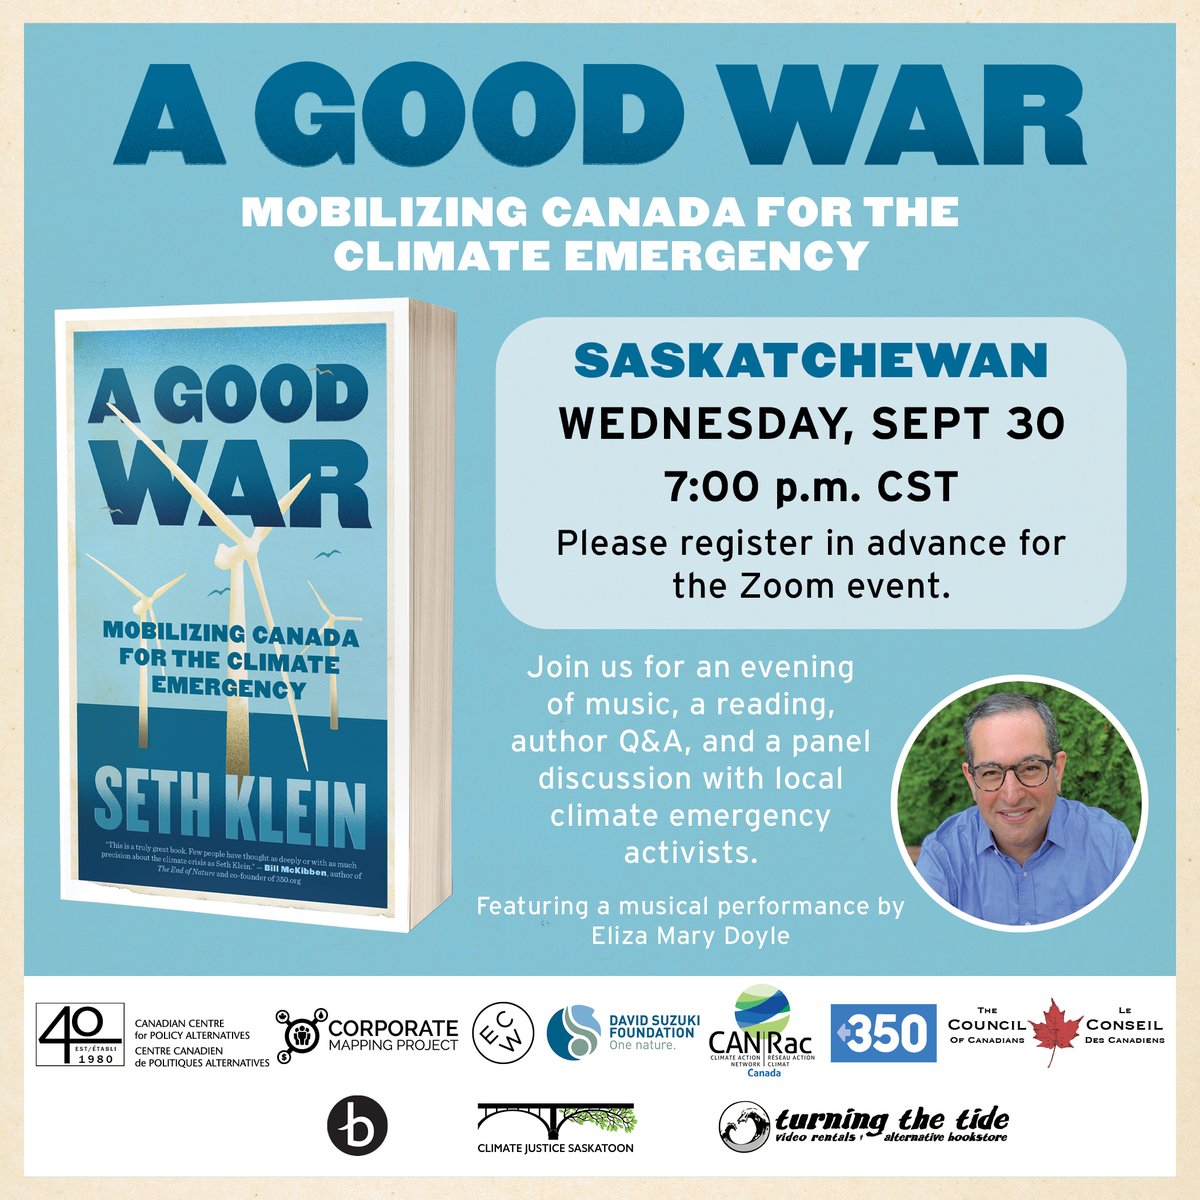 Sept 30 @ 7:00 is the Saskatchewan Book Launch, with musical guest  @elizamarydoyle and a great panel of local climate emergency activists. You can register here:  https://us02web.zoom.us/webinar/register/WN_h0F_UPBOTUGB-S22Nh-UcQ